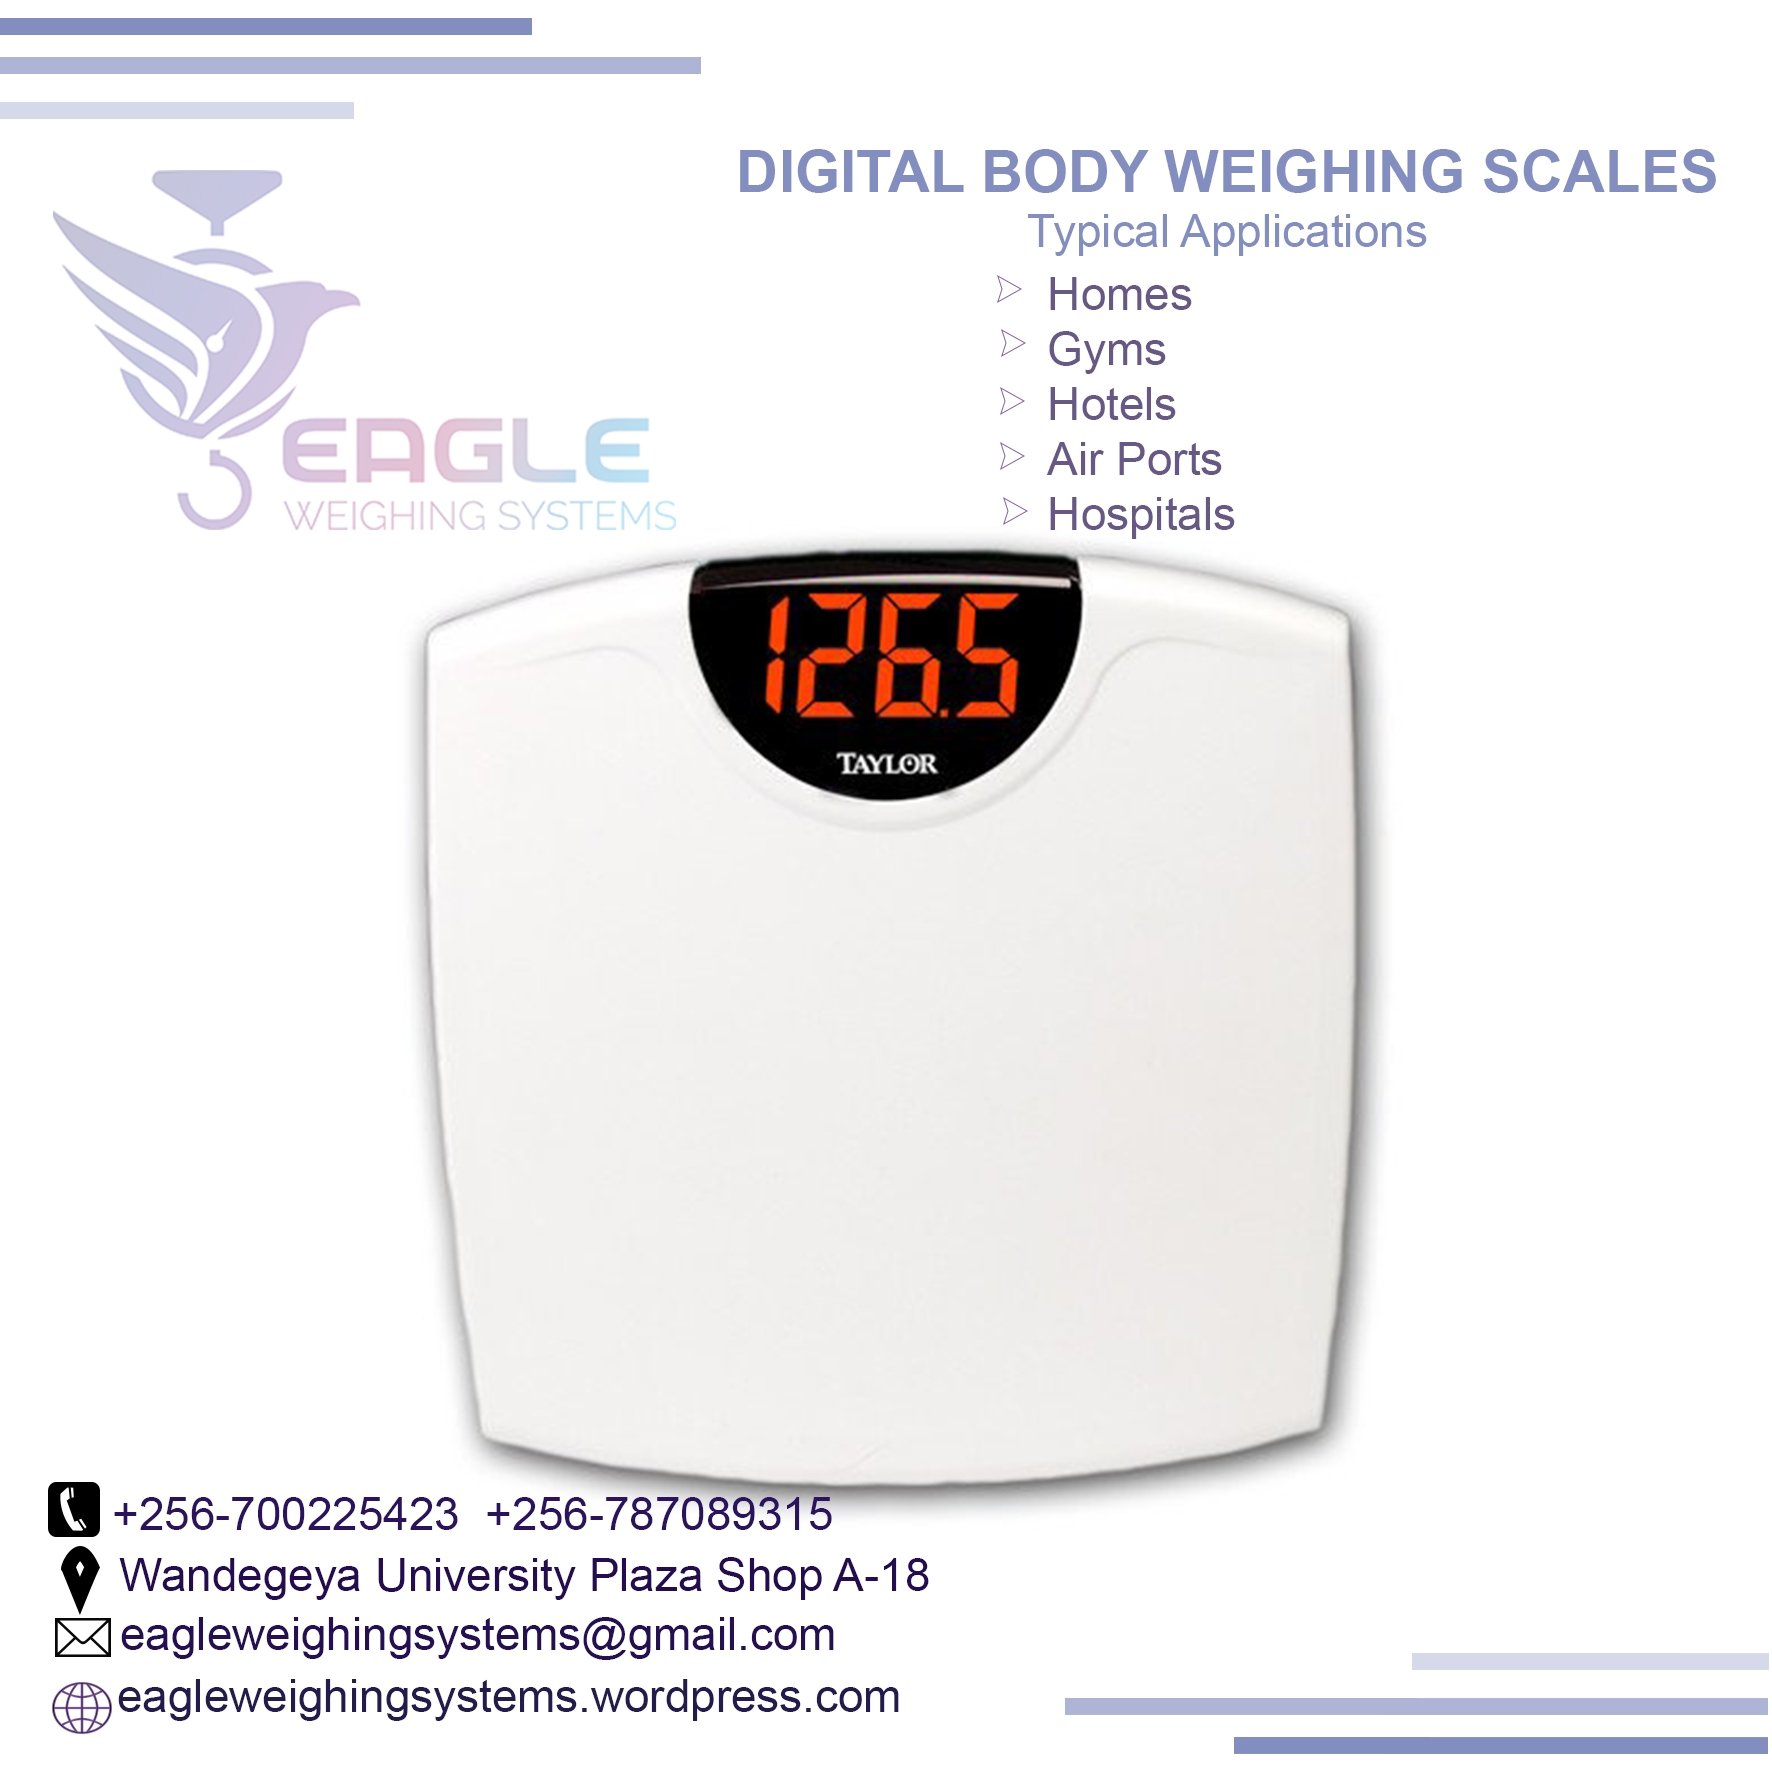 Ultra-portable personal weighing scales for the gym, scales - Pundas ...